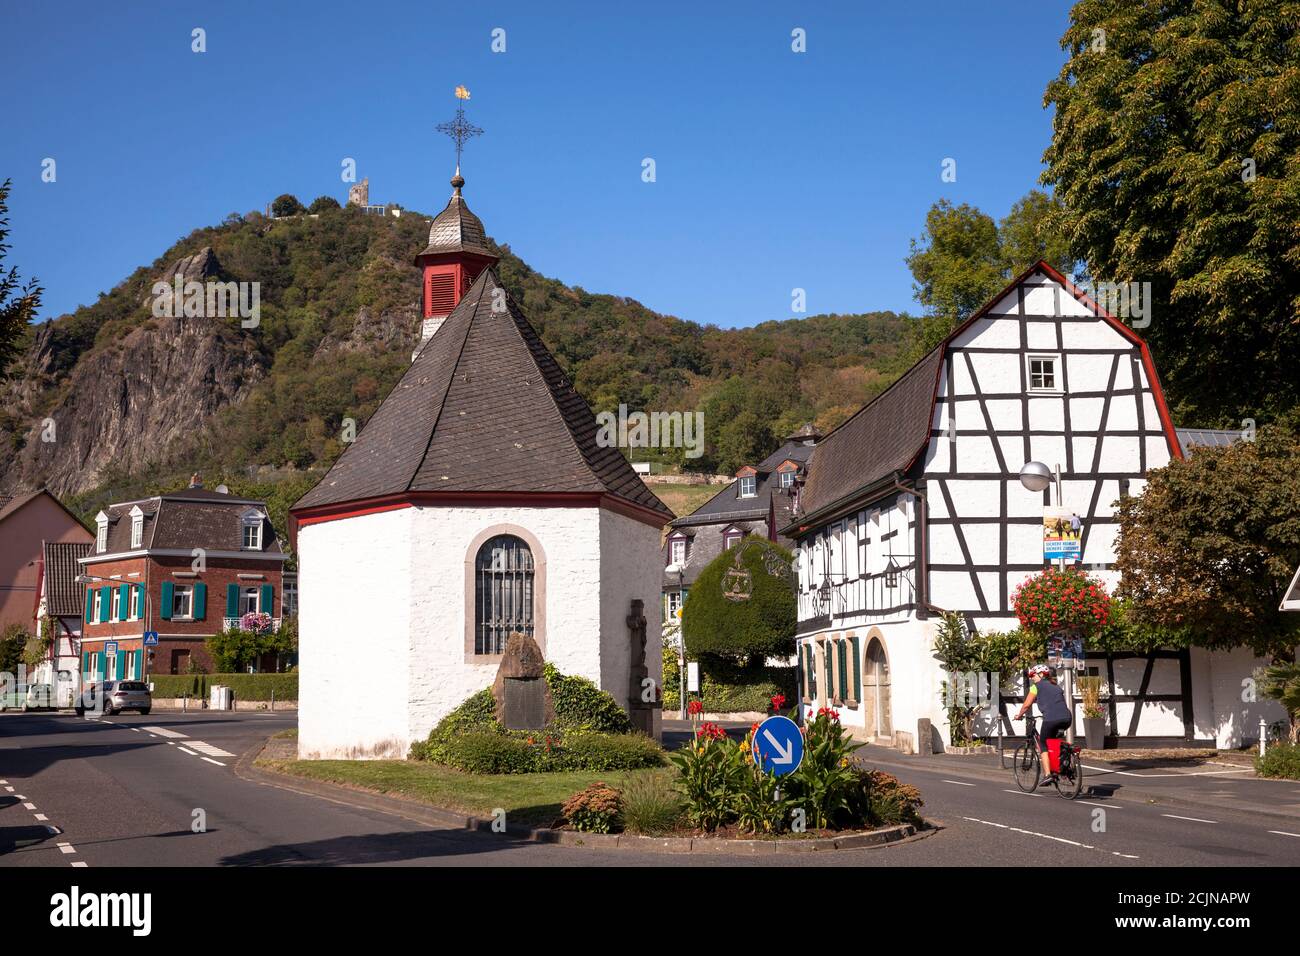 Chapel of Our Lady in Bad Honnef-Rhoendorf on the river Rhine, view to the Drachenfels hill, North Rhine-Westphalia, Germany.  Marienkapelle in Bad Ho Stock Photo